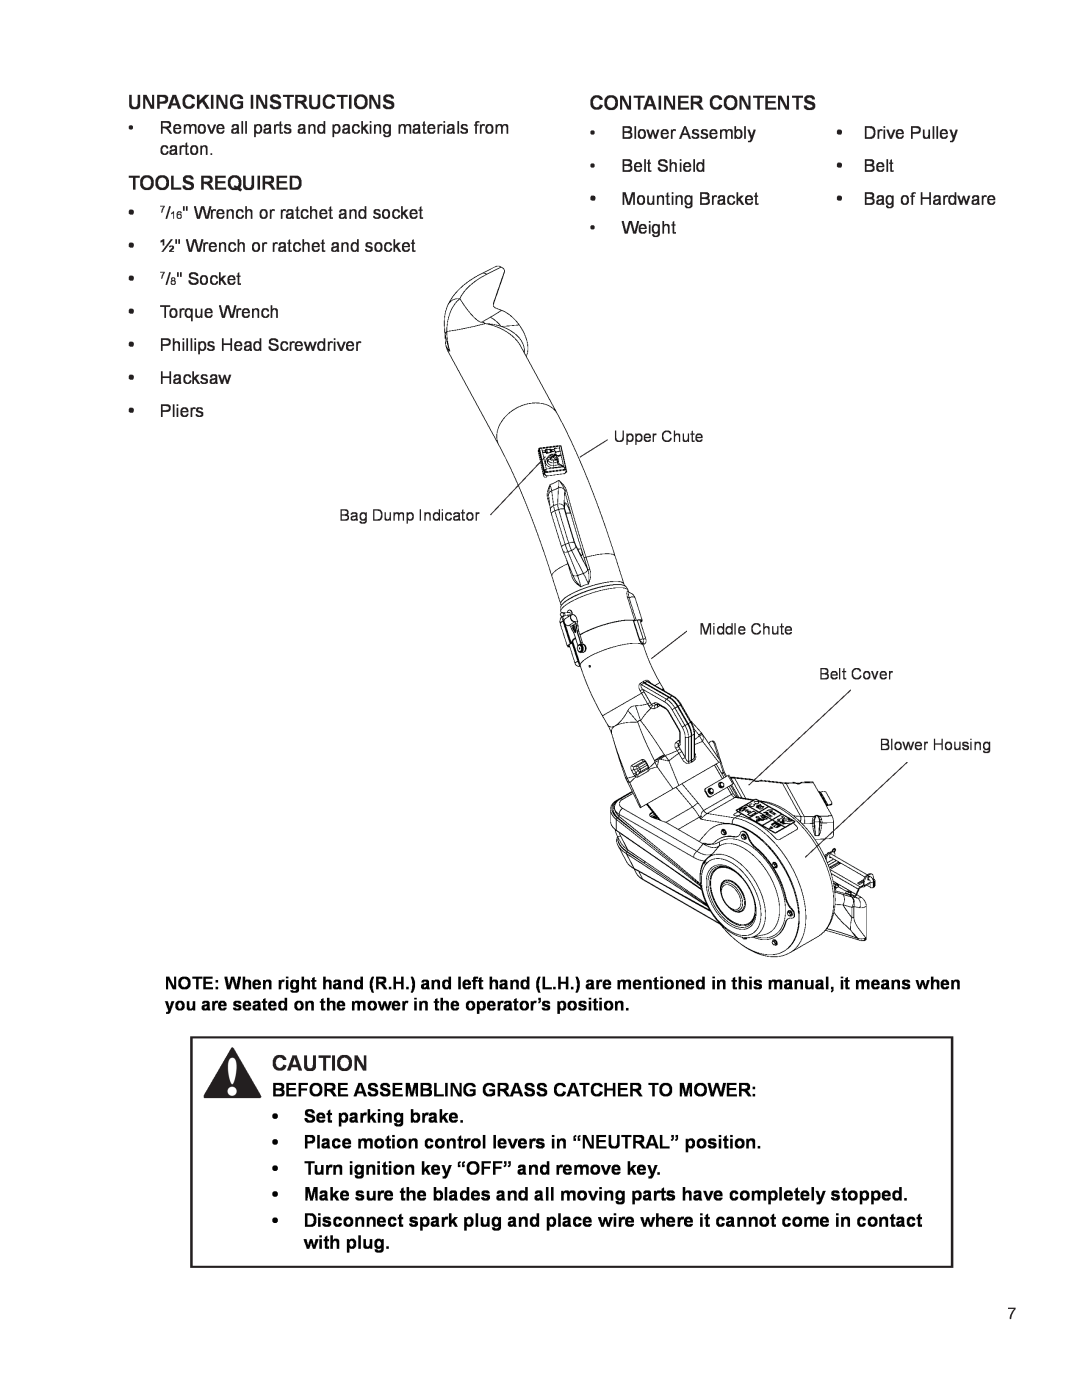 Husqvarna 966004501, 2009-01 manual Unpacking Instructions, Tools Required, Container Contents 